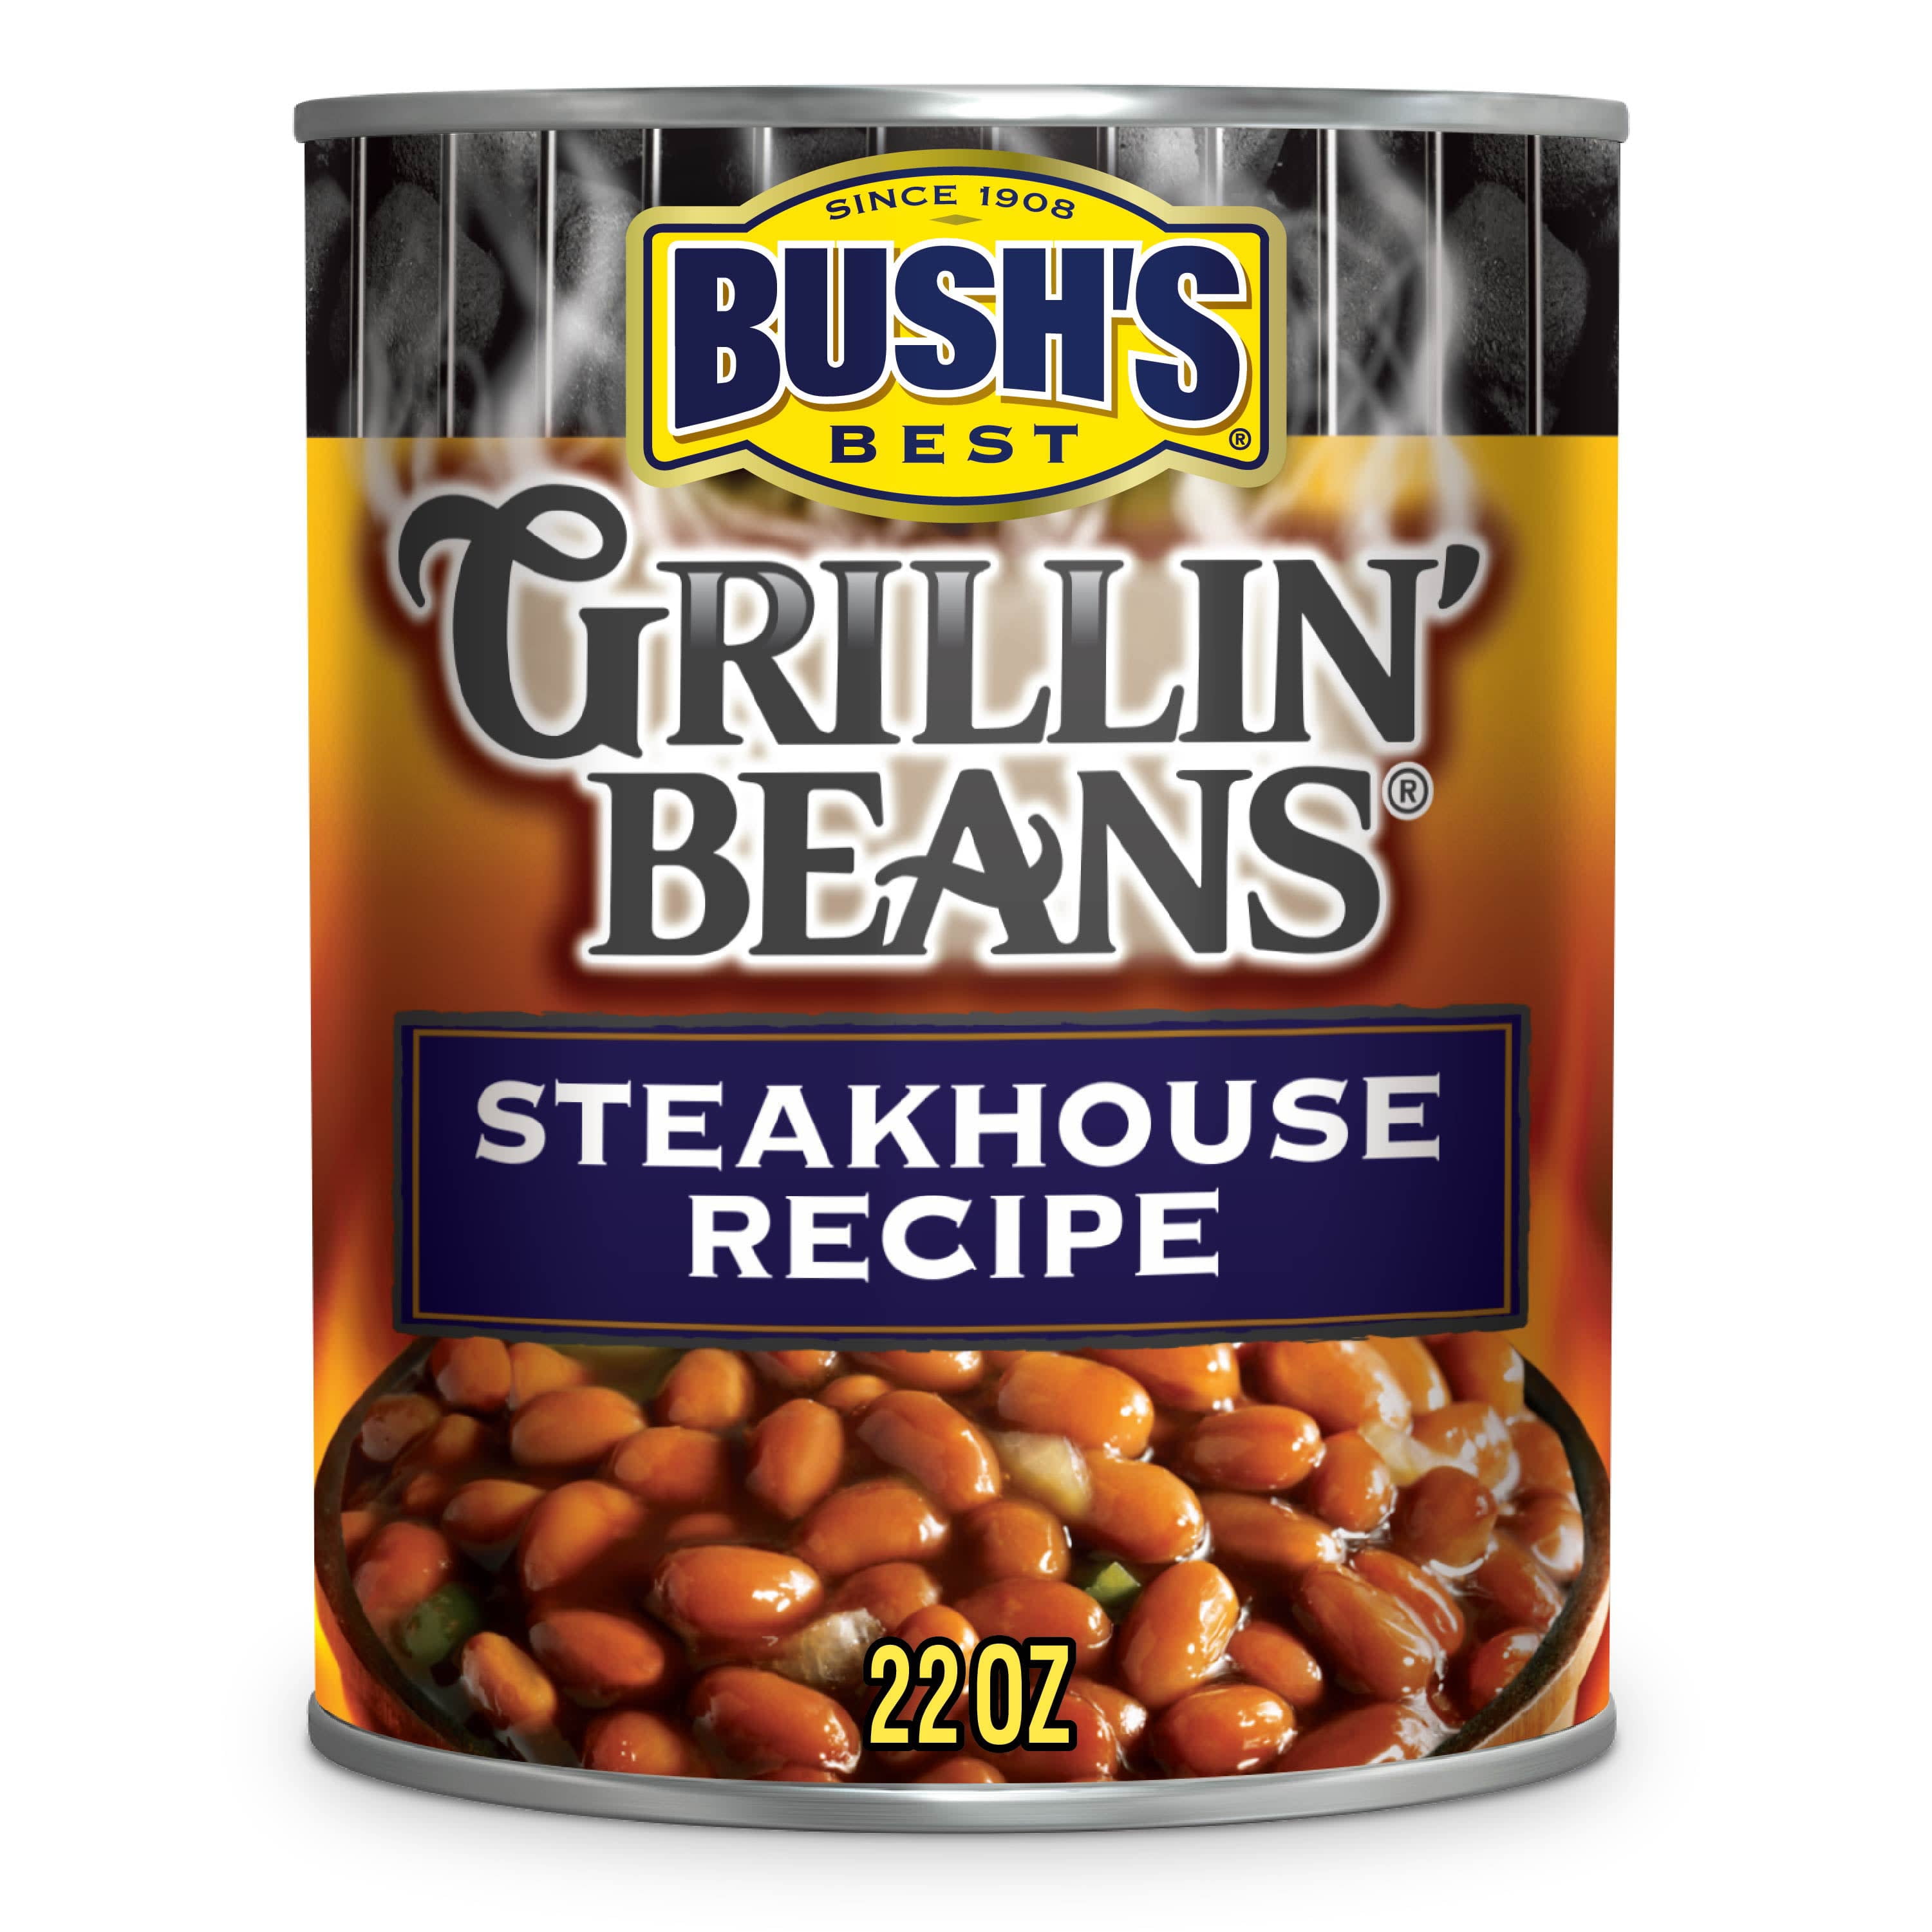 Bush's Chili Beans, Canned Pinto Beans in Mild Chili Sauce, 16 oz